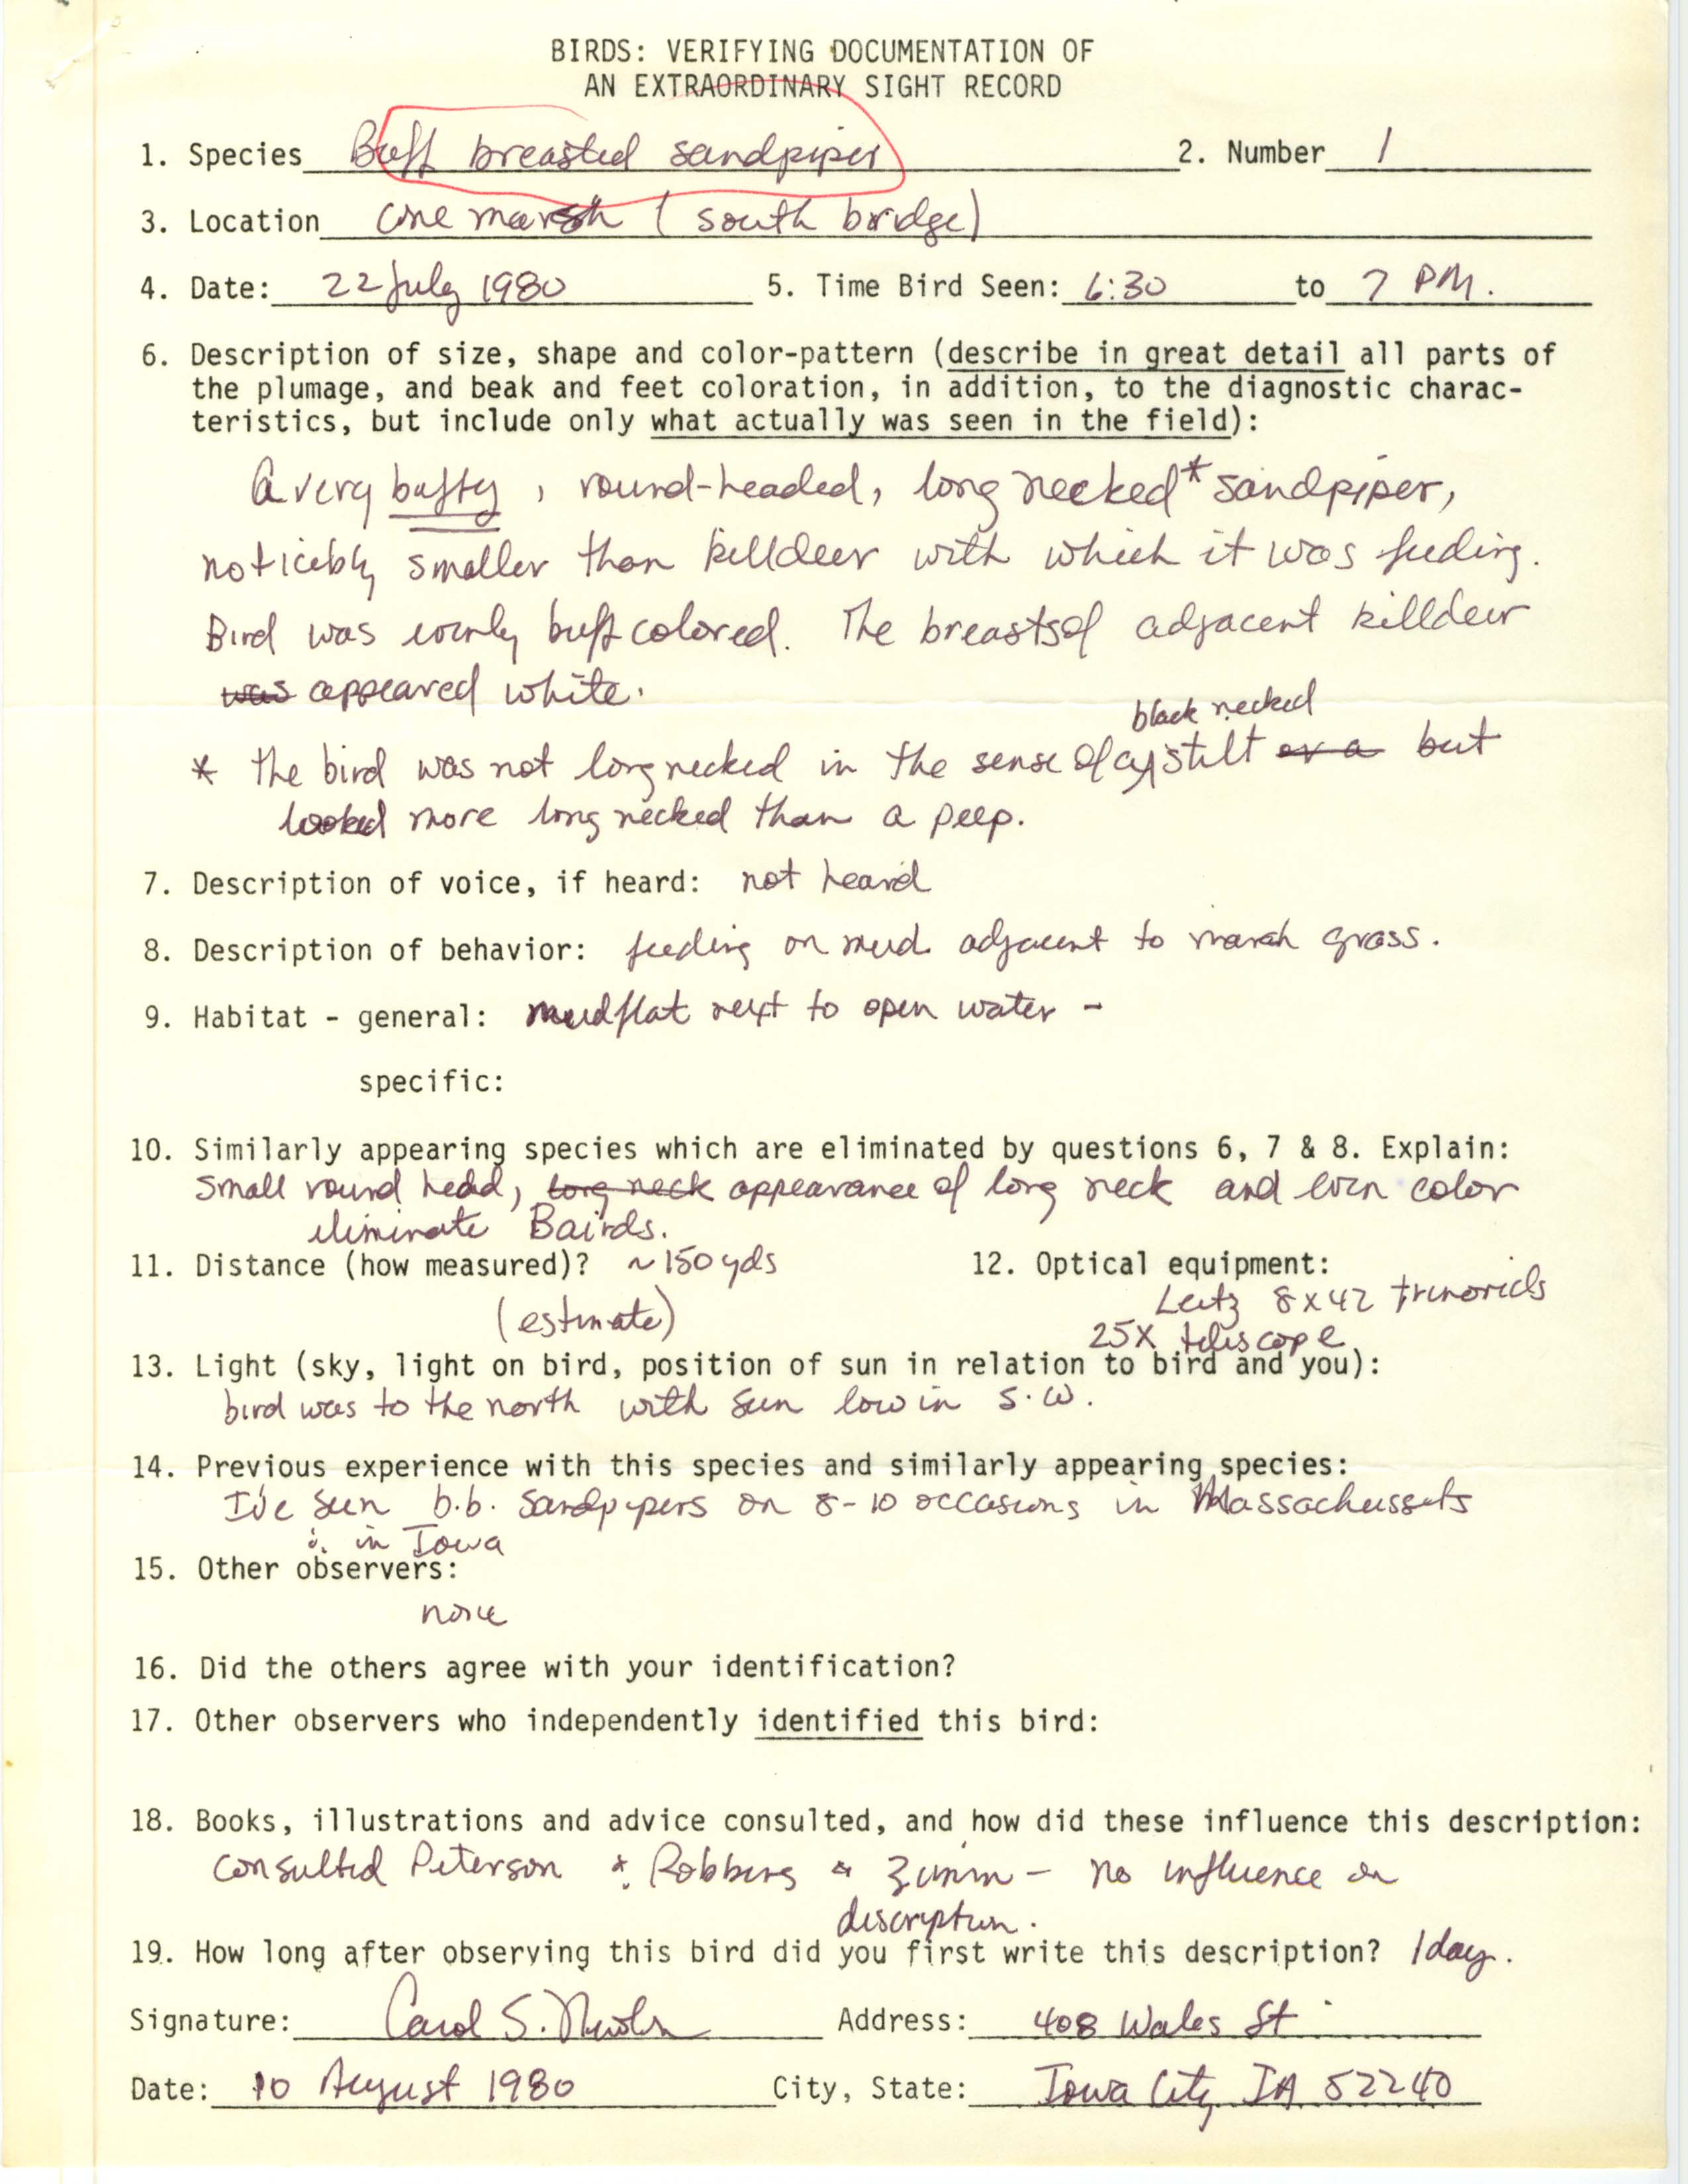 Rare bird documentation form for Buff-breasted Sandpiper at Cone Marsh, 1980